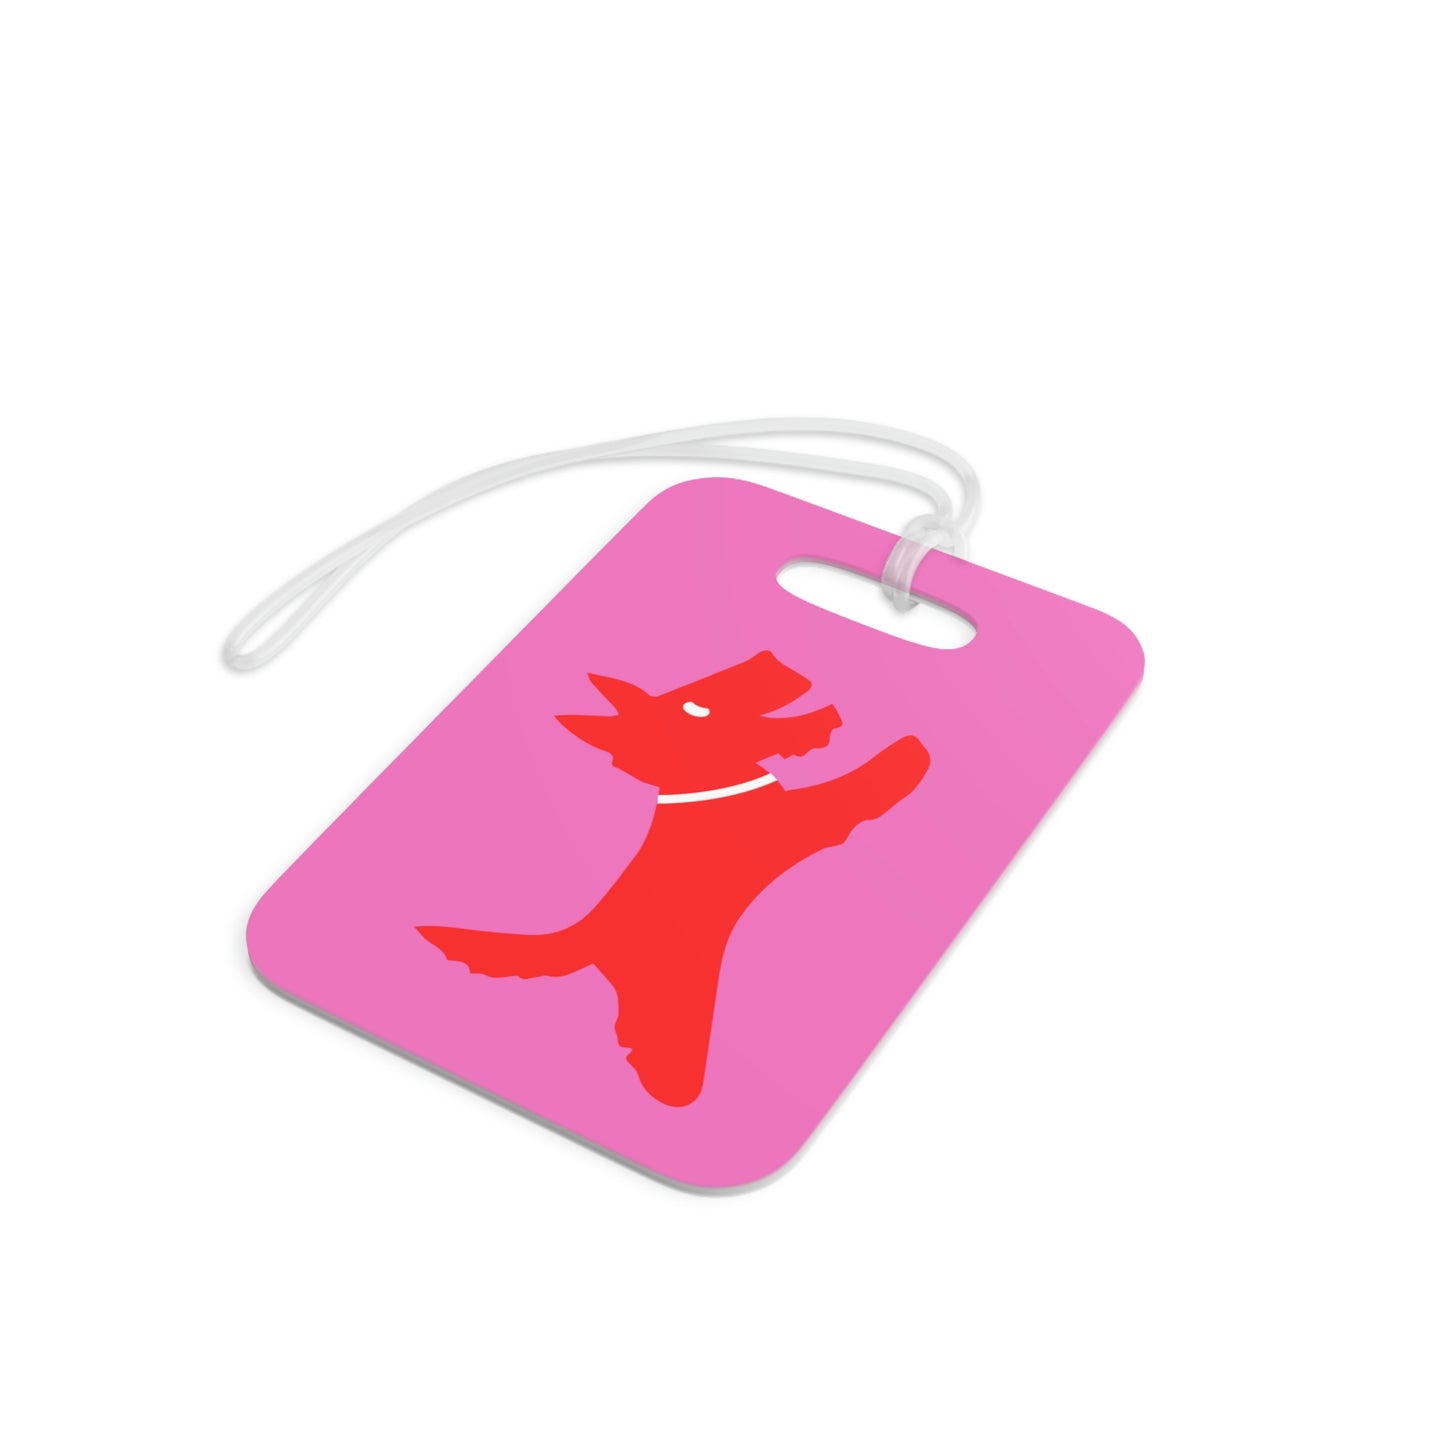 Perky's Bag Tag in Red